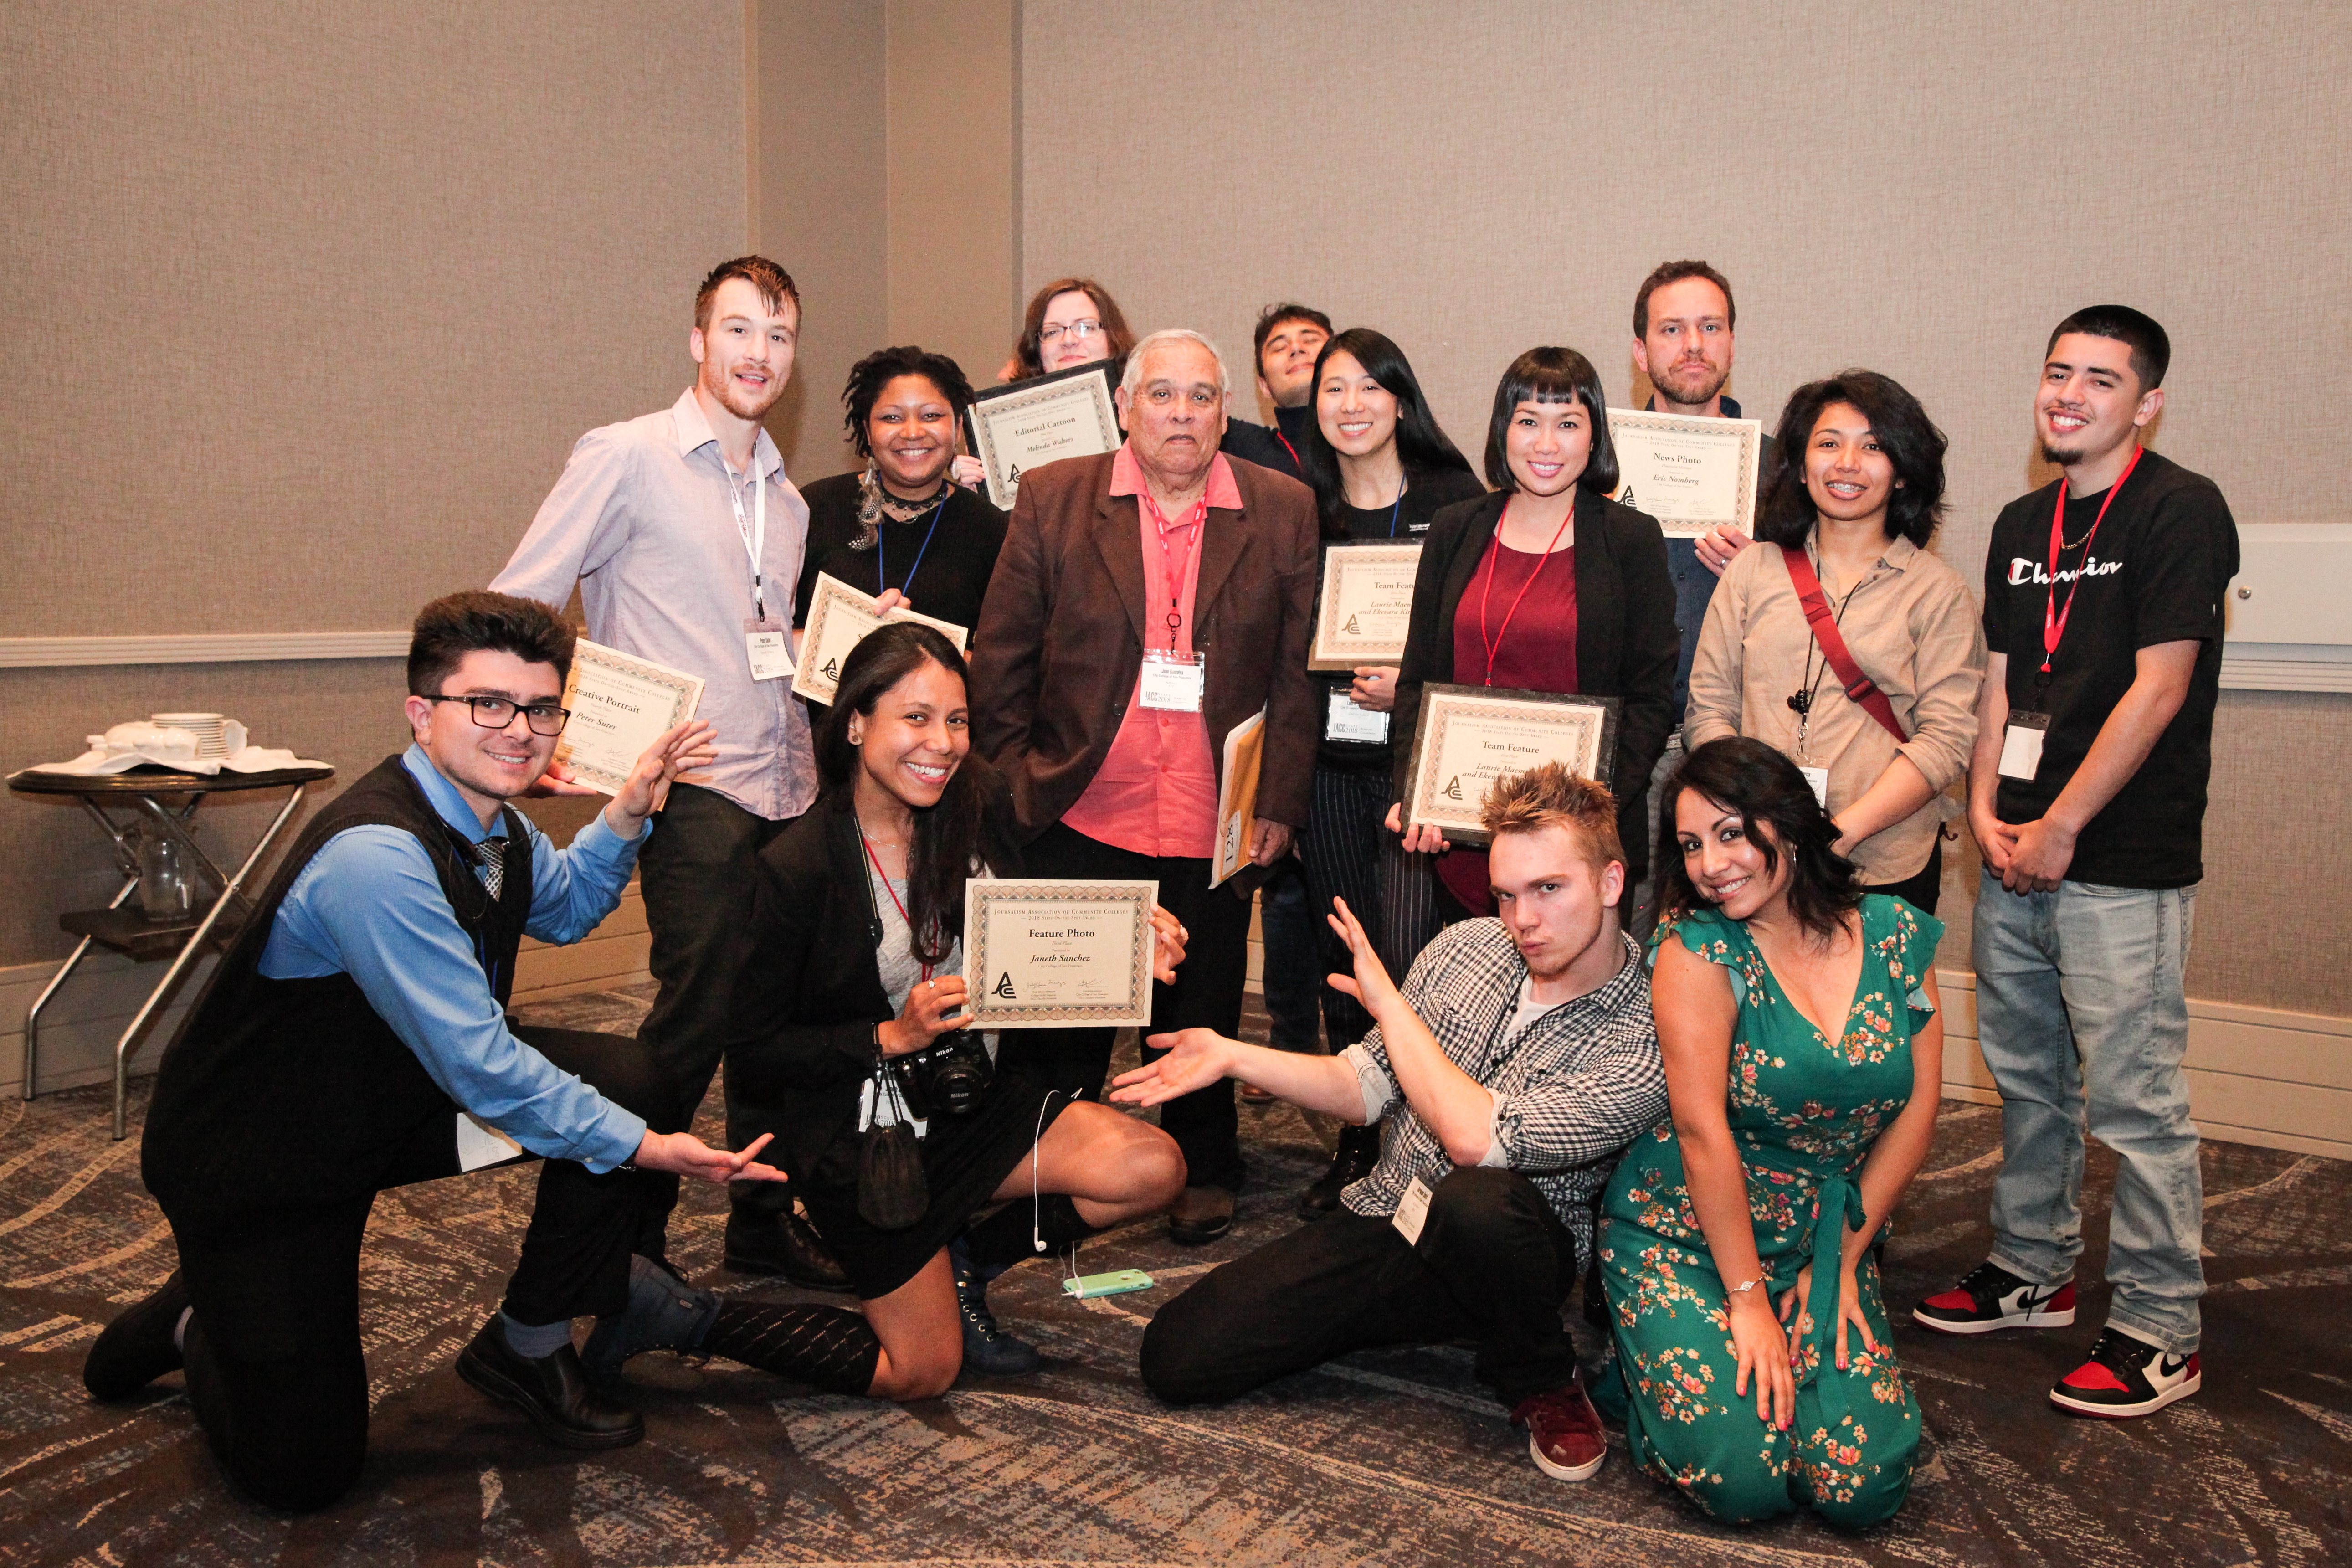 Journalism students from The Guardsman and Etc. Magazine win awards during the Journalism Association of Community Colleges State Convention on Saturday, March 24, 2018 in Burbank, Calif.